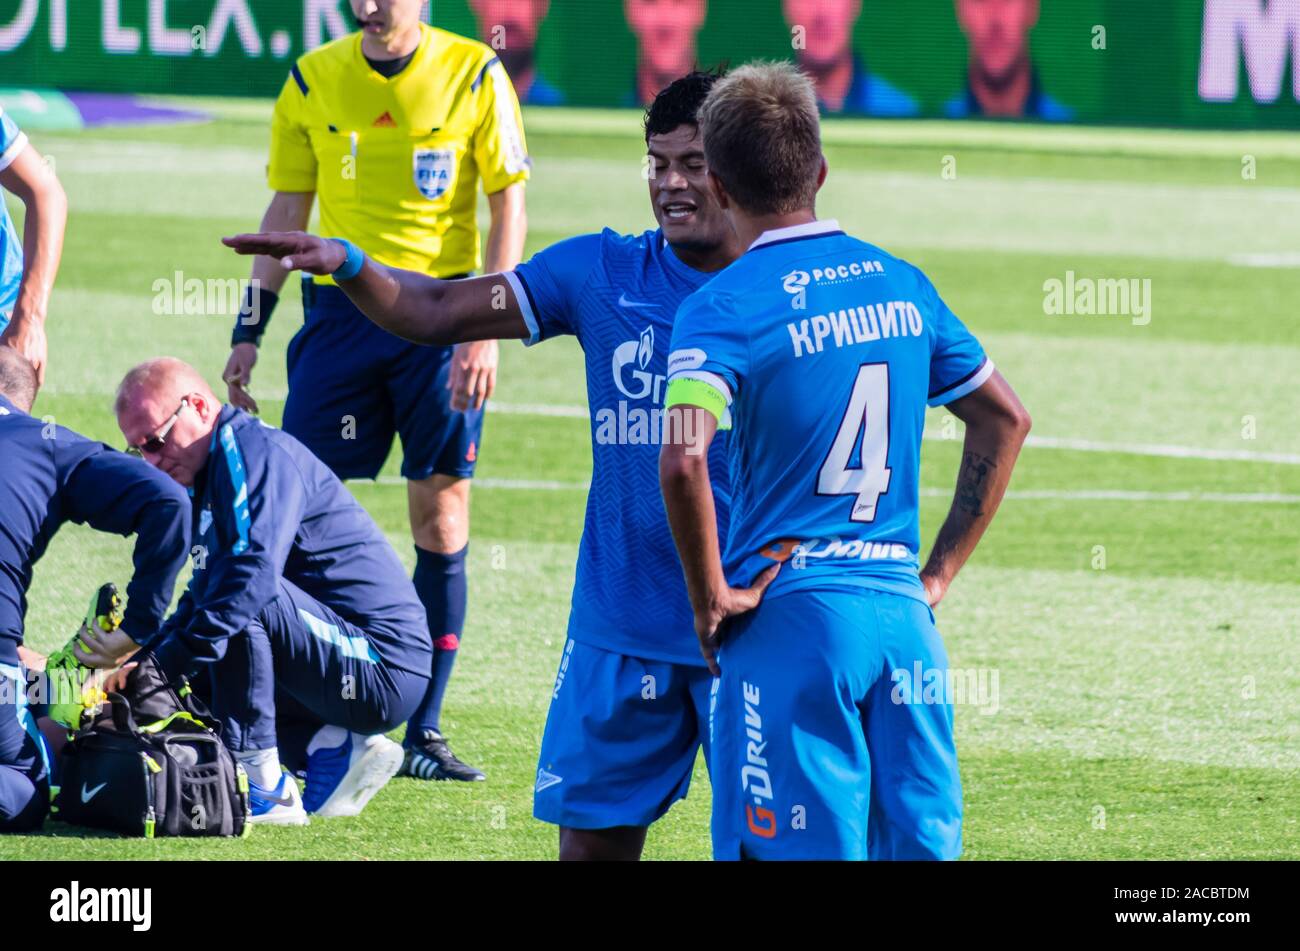 SAINT-PETERSBURG, RUSSIA - AUGUST 1: Players of Football Club Zenit Hulk and Domeniko Criscito at the match of Championship of Russia on August 1, 201 Stock Photo